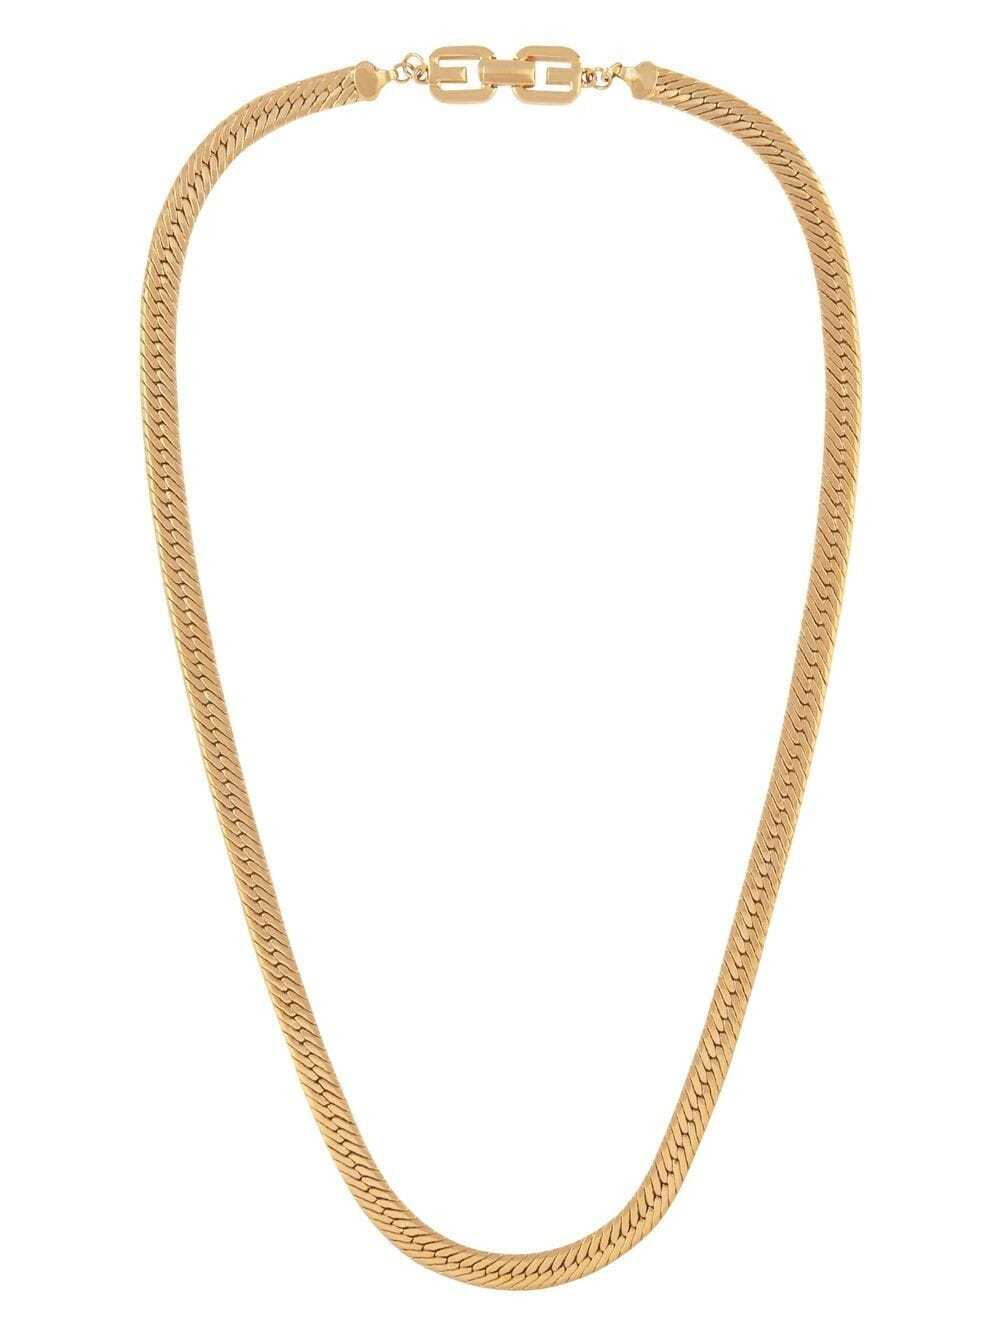 Givenchy Pre-Owned 1980s snake chain necklace - Gold